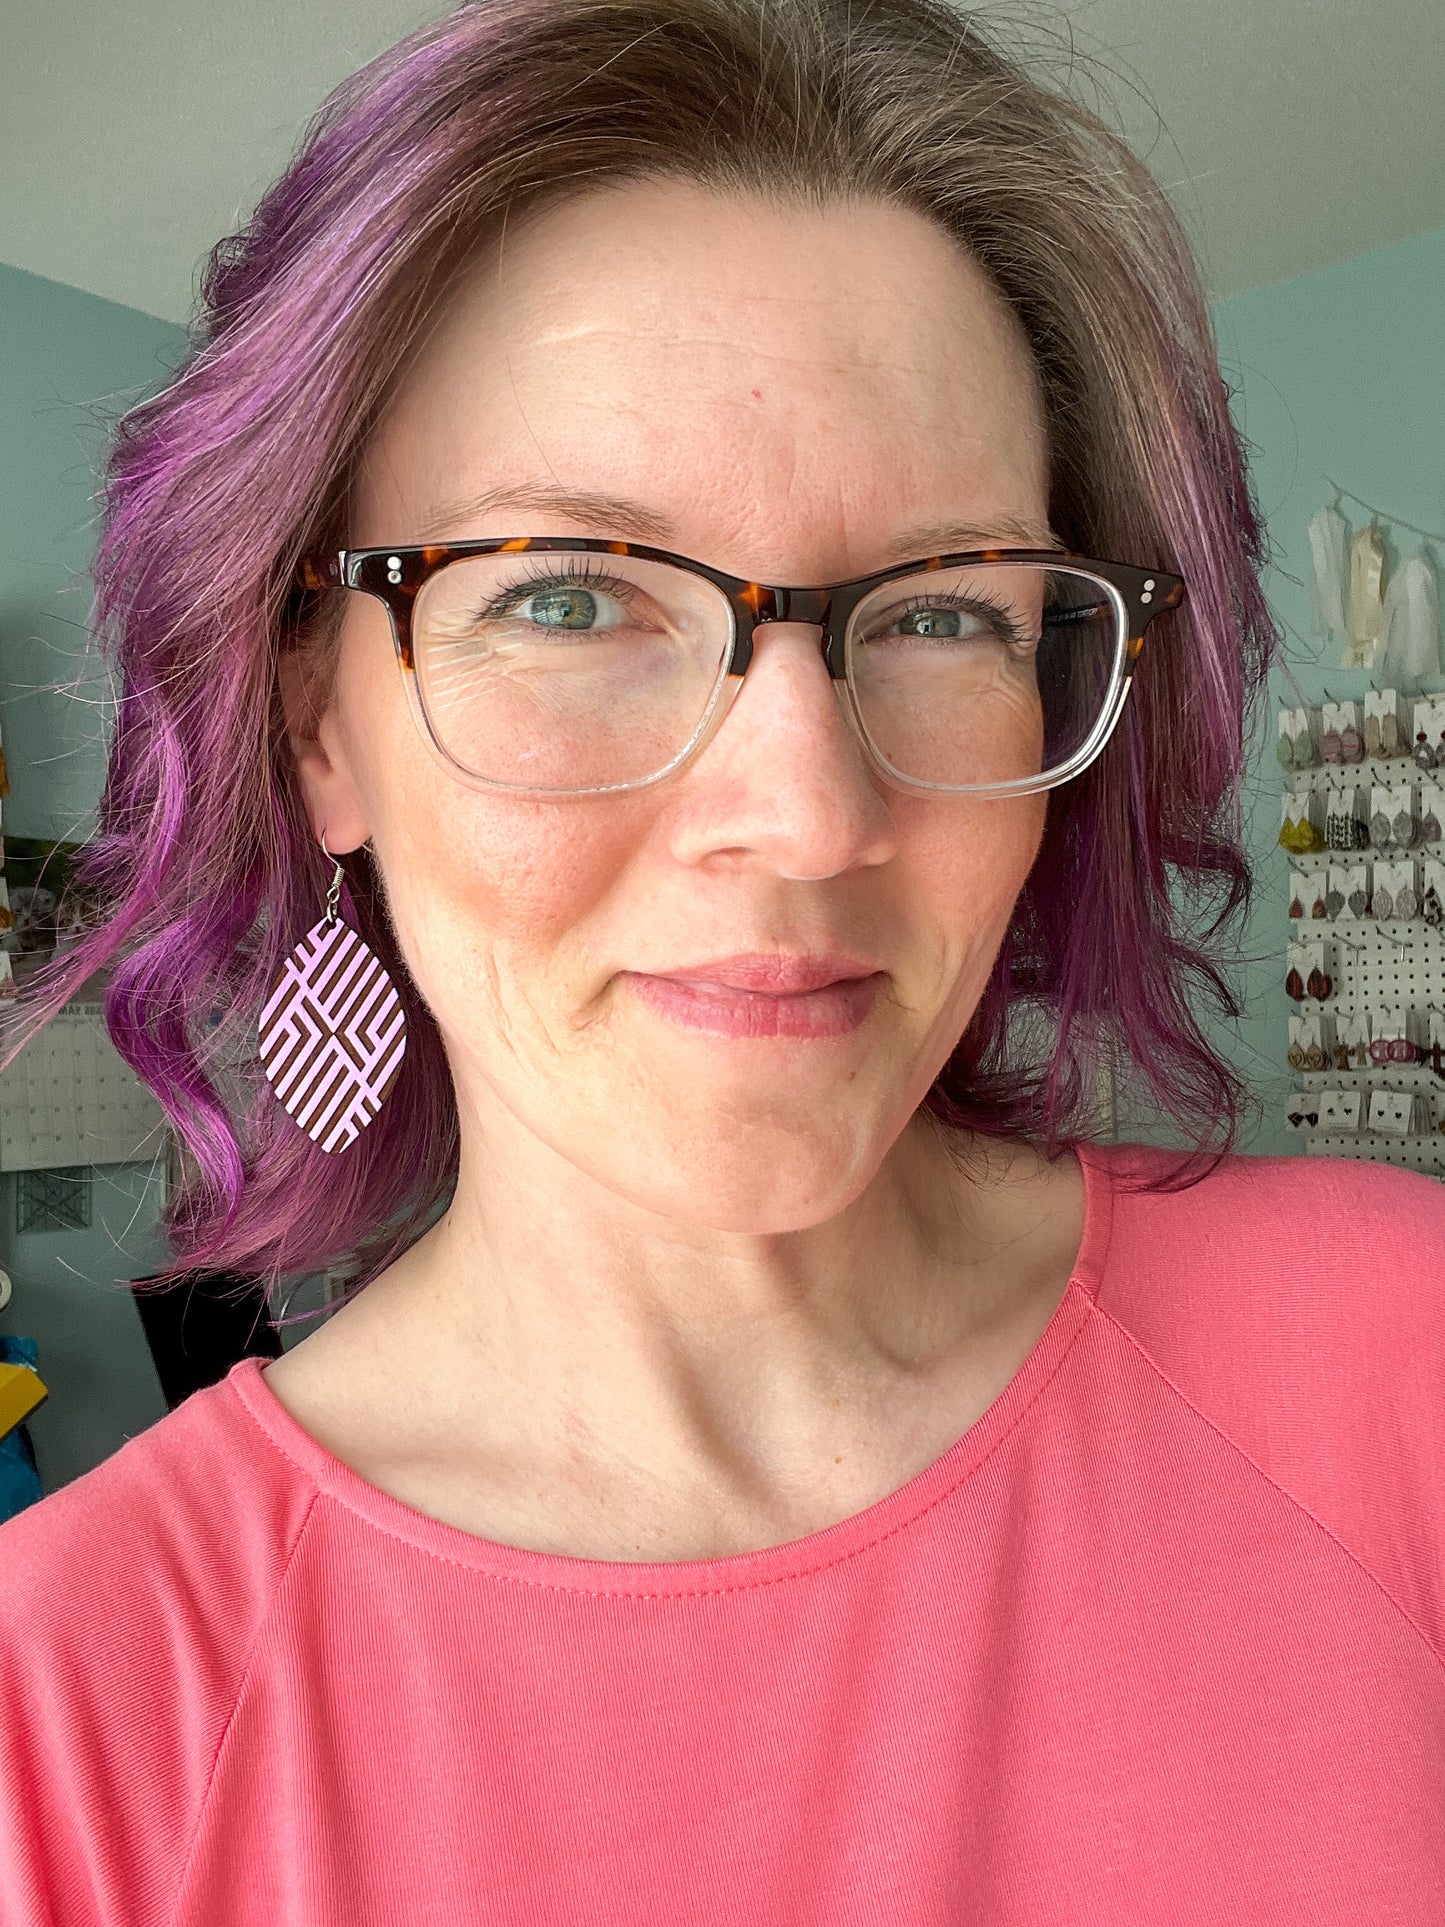 Hand Painted Geometric Leaf Wood Earrings: Choose From 3 Color Options